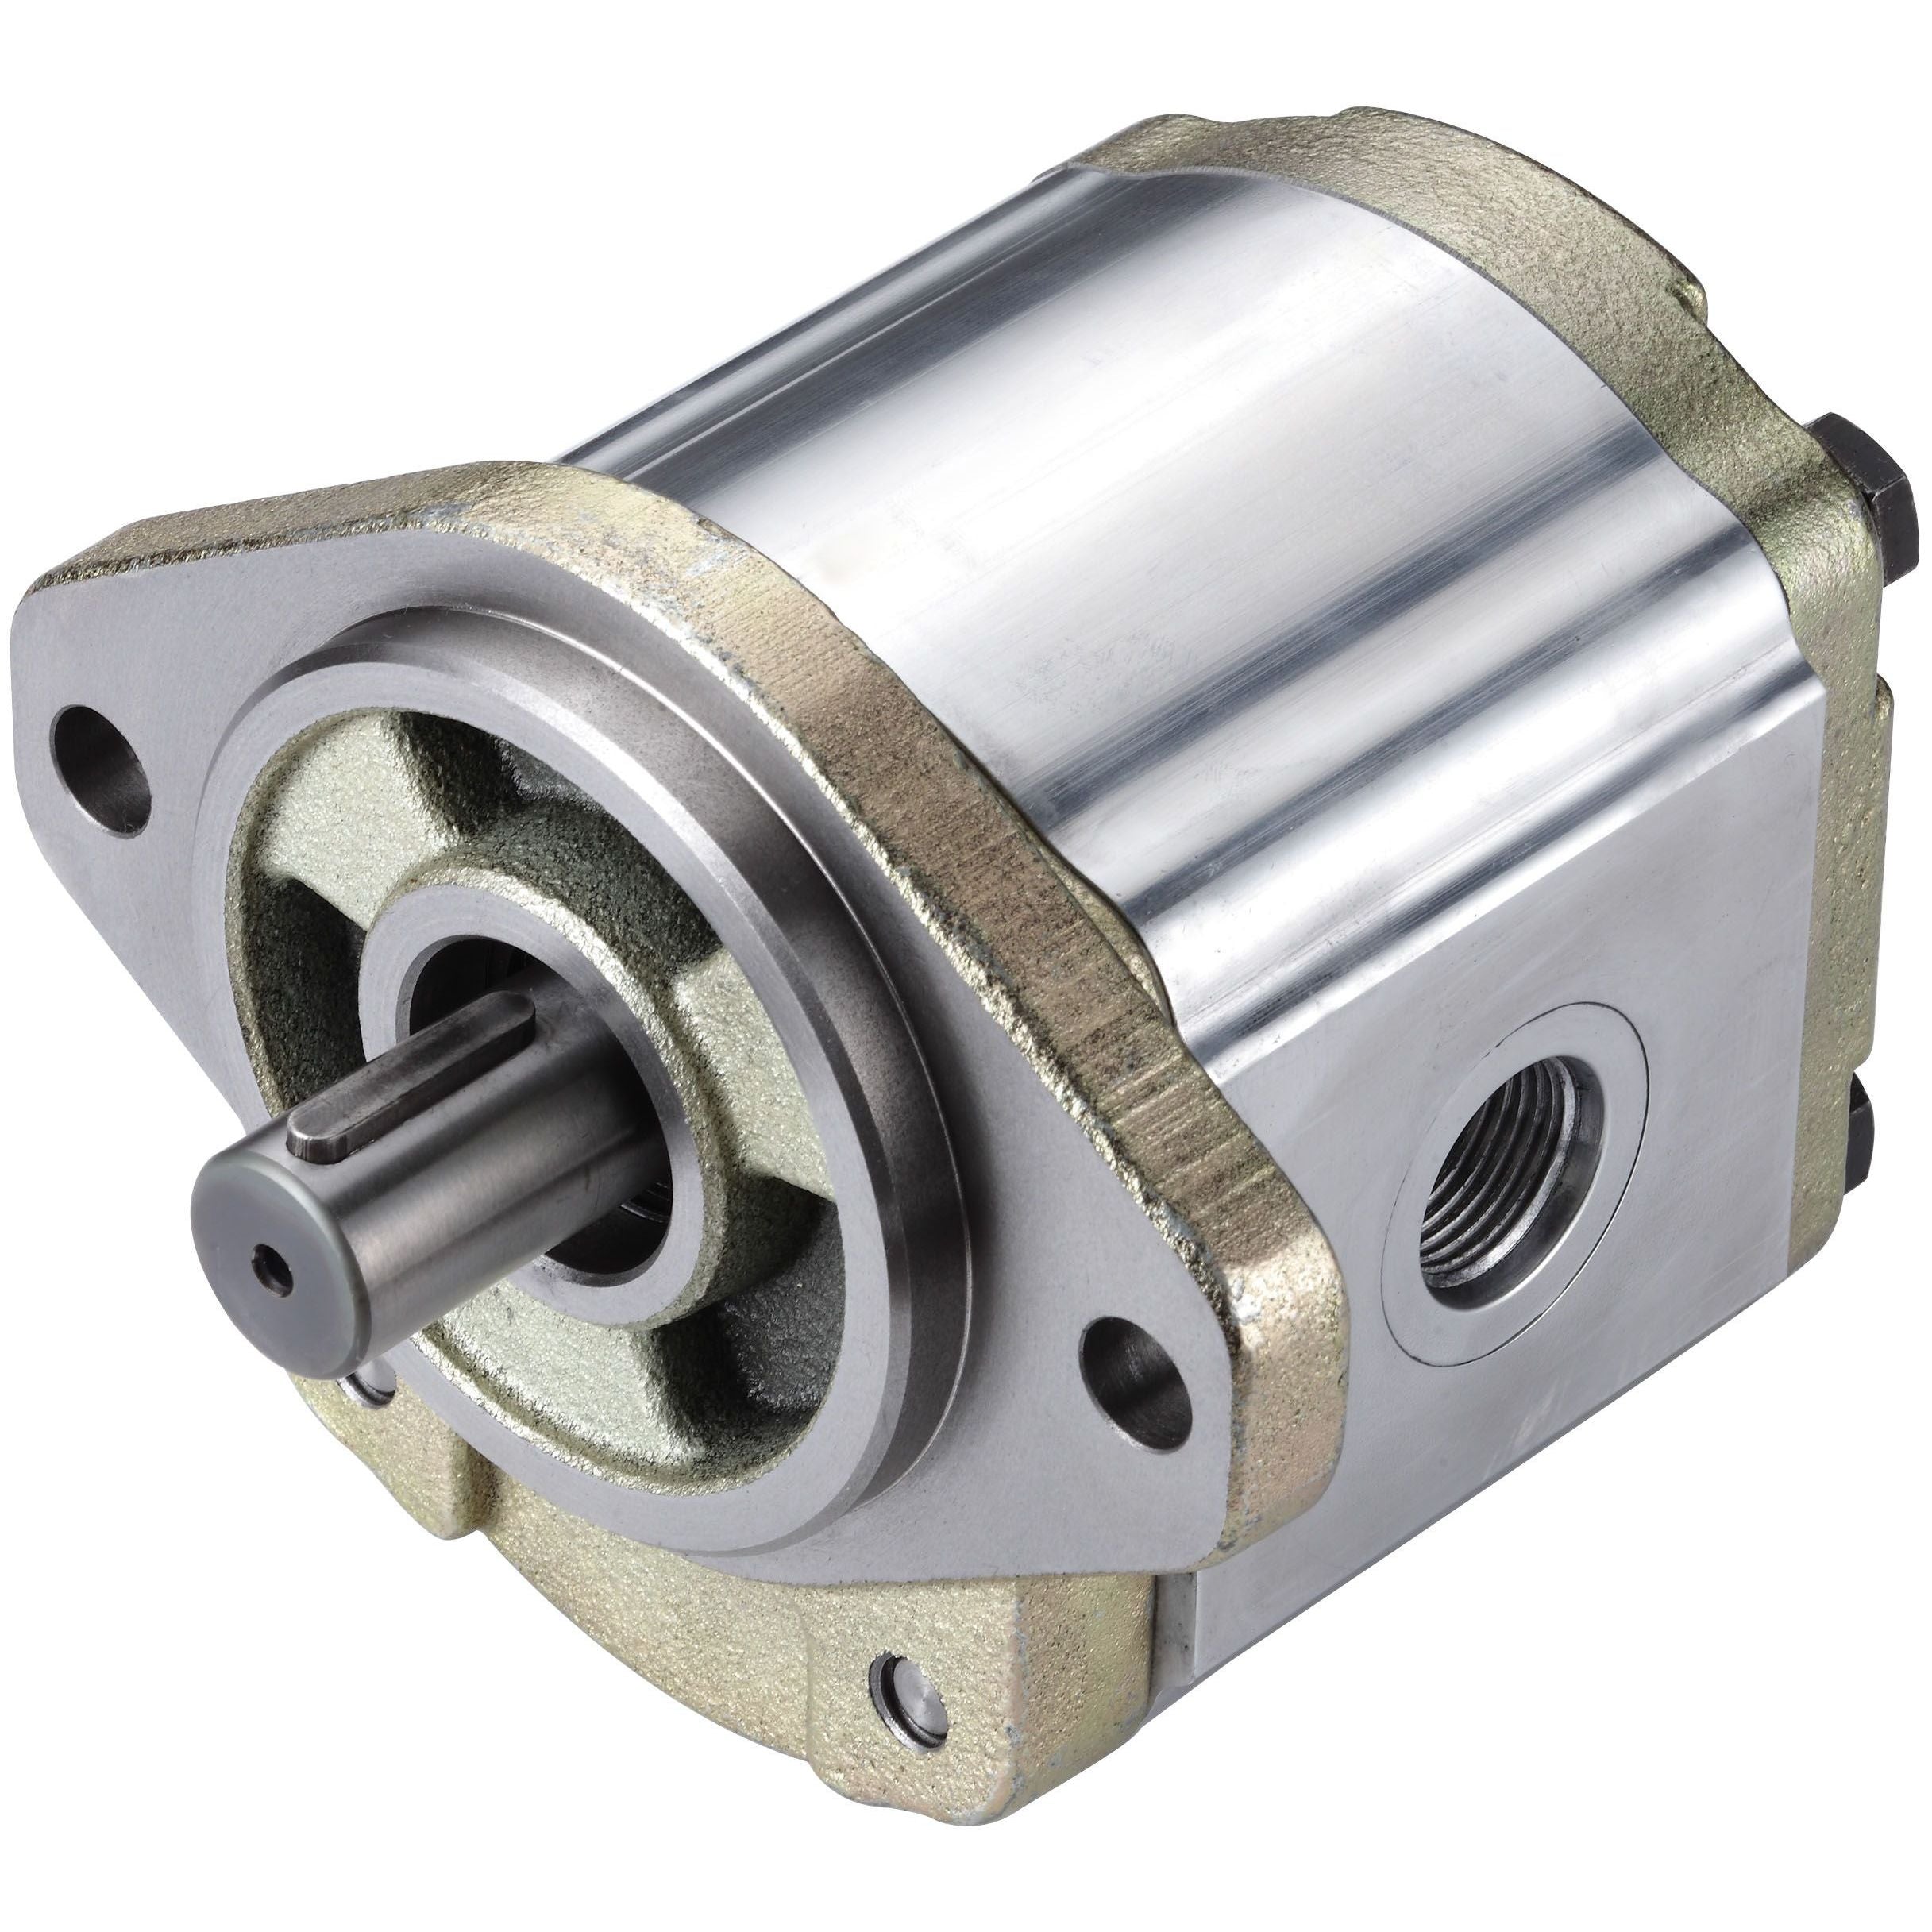 3GA5ZU133L : Honor Gear Pump, CCW Rotation, 33cc (2.01in3), 15.69 GPM, 3500psi, 3000 RPM, #16 SAE (1") In, #12 SAE (3/4") Out, Splined Shaft 11-Tooth, 16/32 Pitch, SAE A 2-Bolt Mount